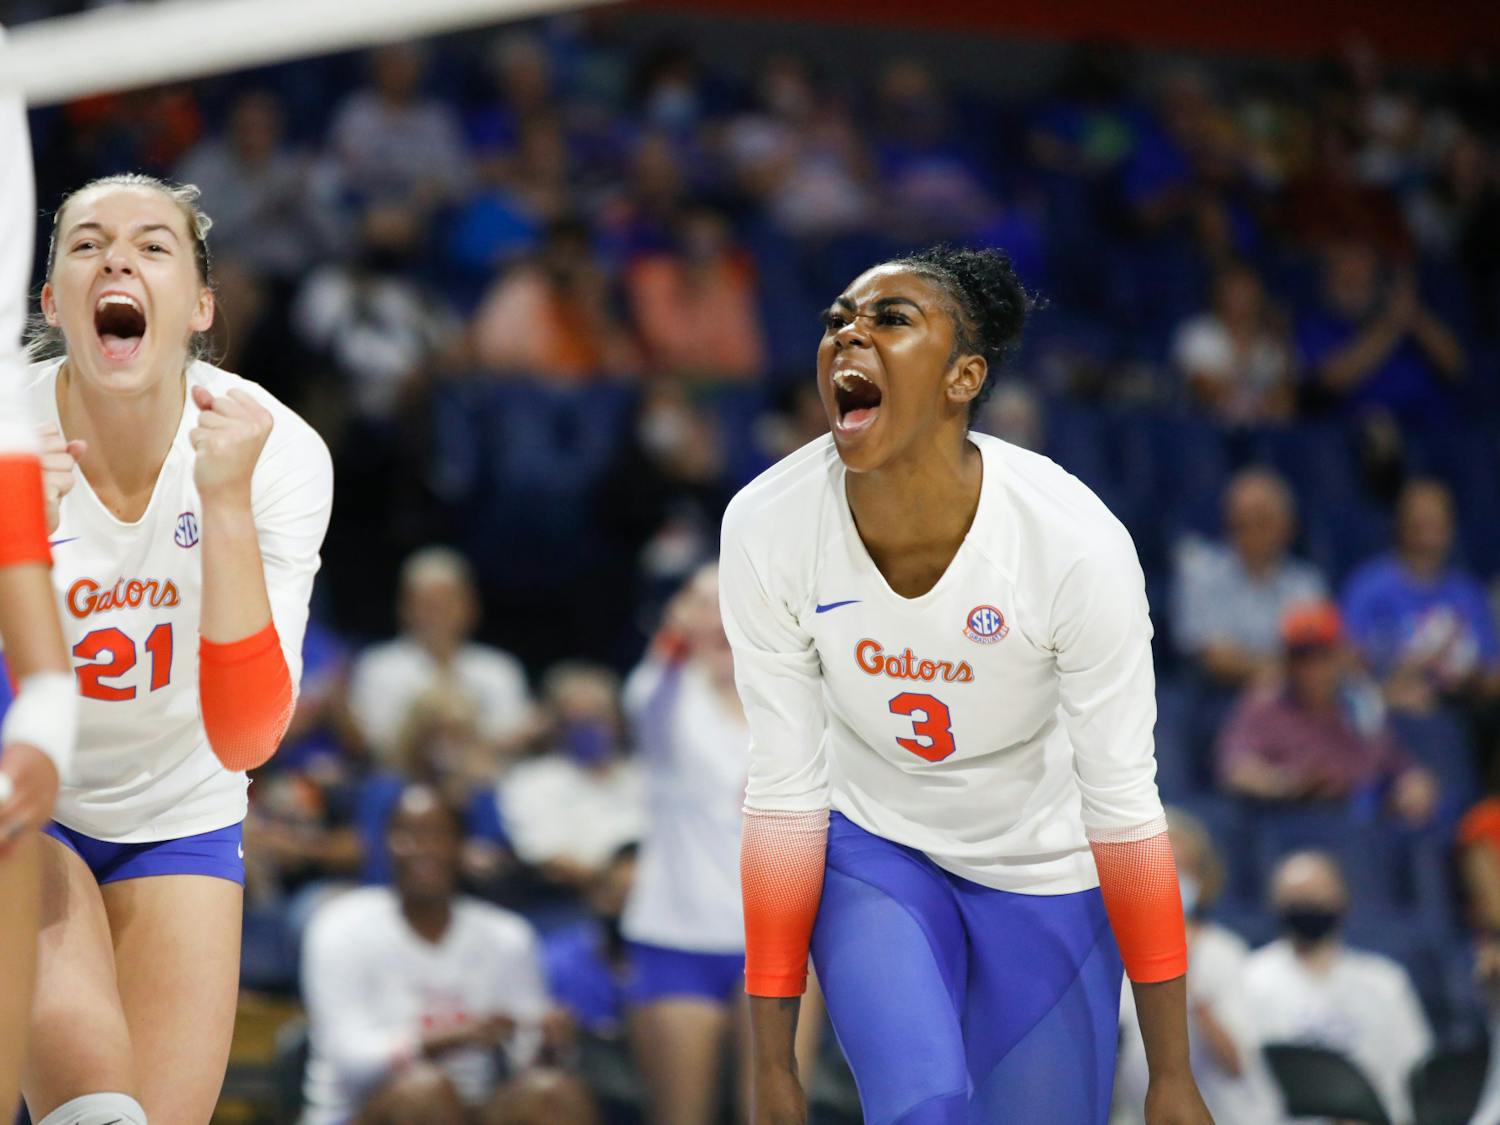 Florida's T'ara Ceasar and Marlie Monserez celebrate a point in Florida's game against Mississippi State on Sept. 24.